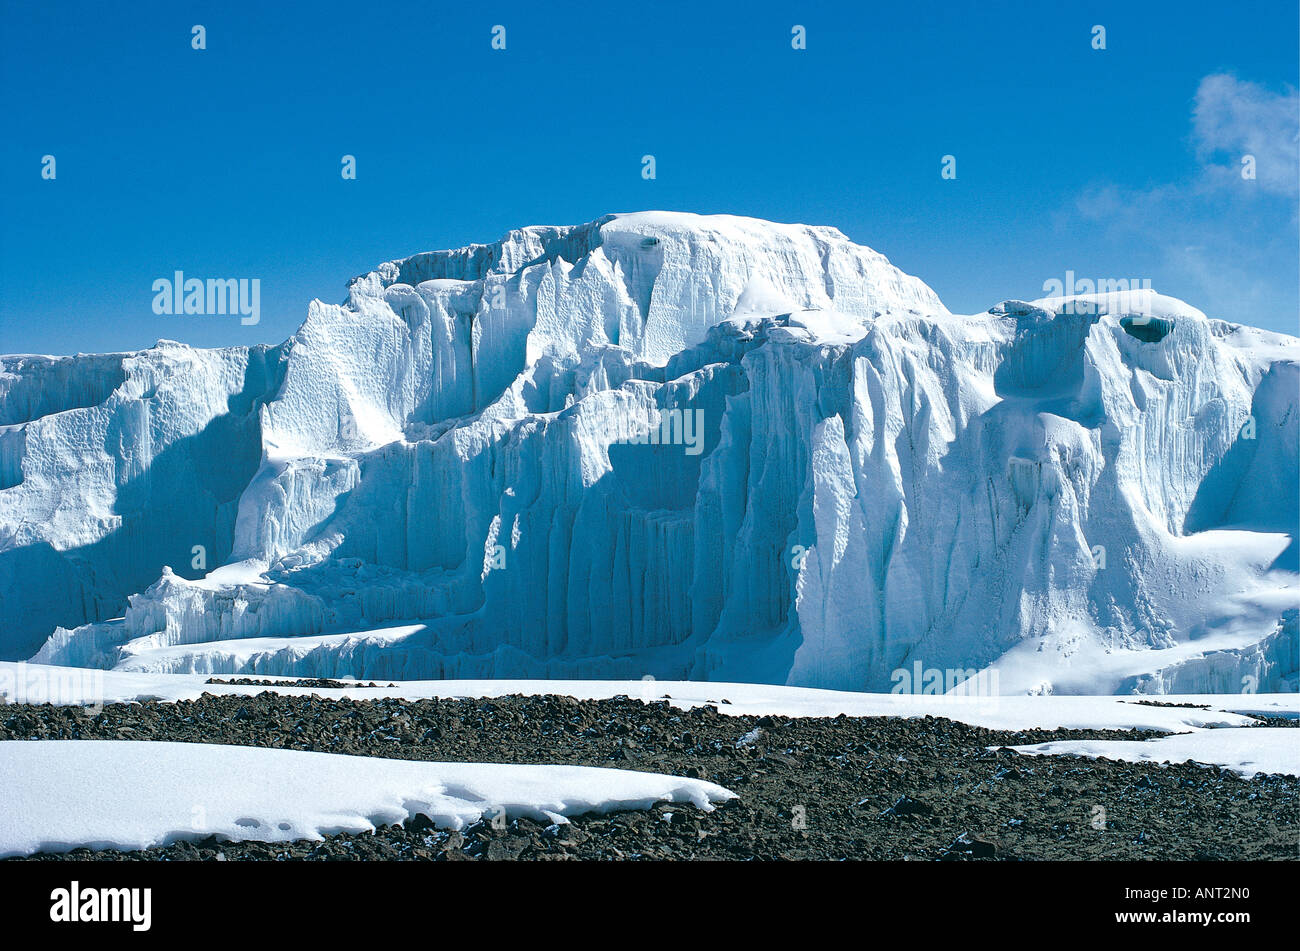 Kilimanjaro Vast ice cliffs and seracs inside the crater Tanzania East Africa Stock Photo